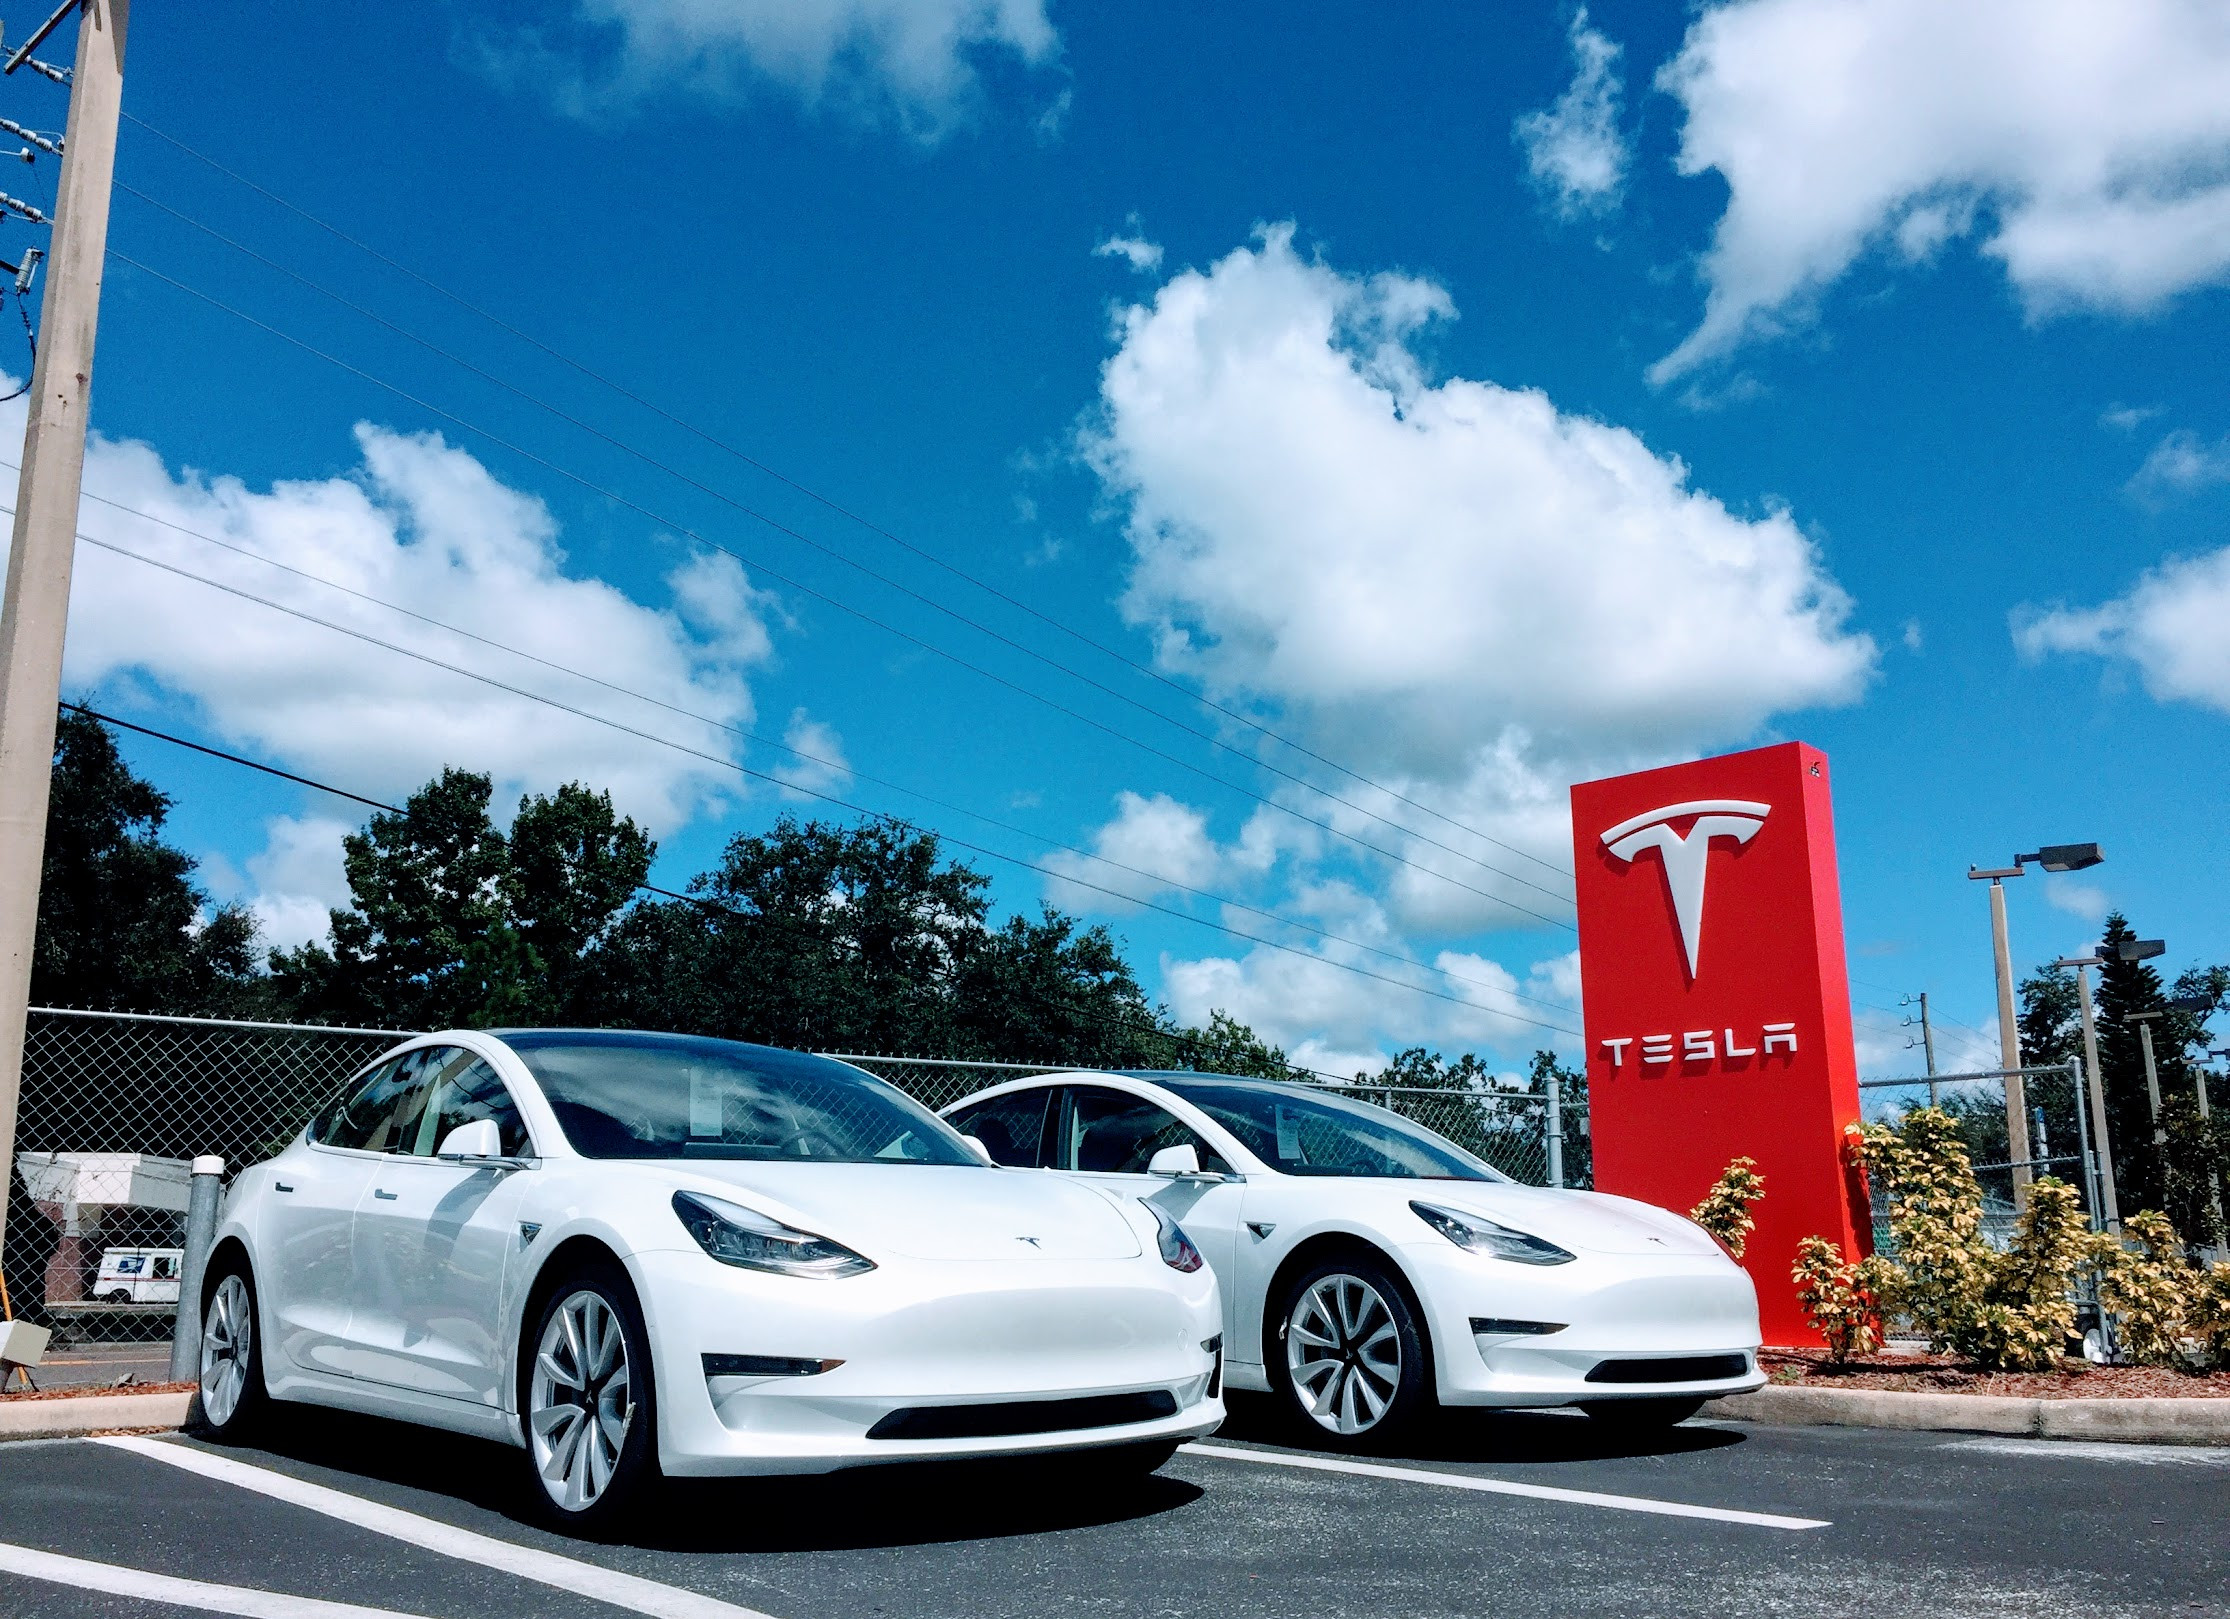 tesla model 3 deliveries tampa delivery center florida zach shahan cleantechnica 5.jpg